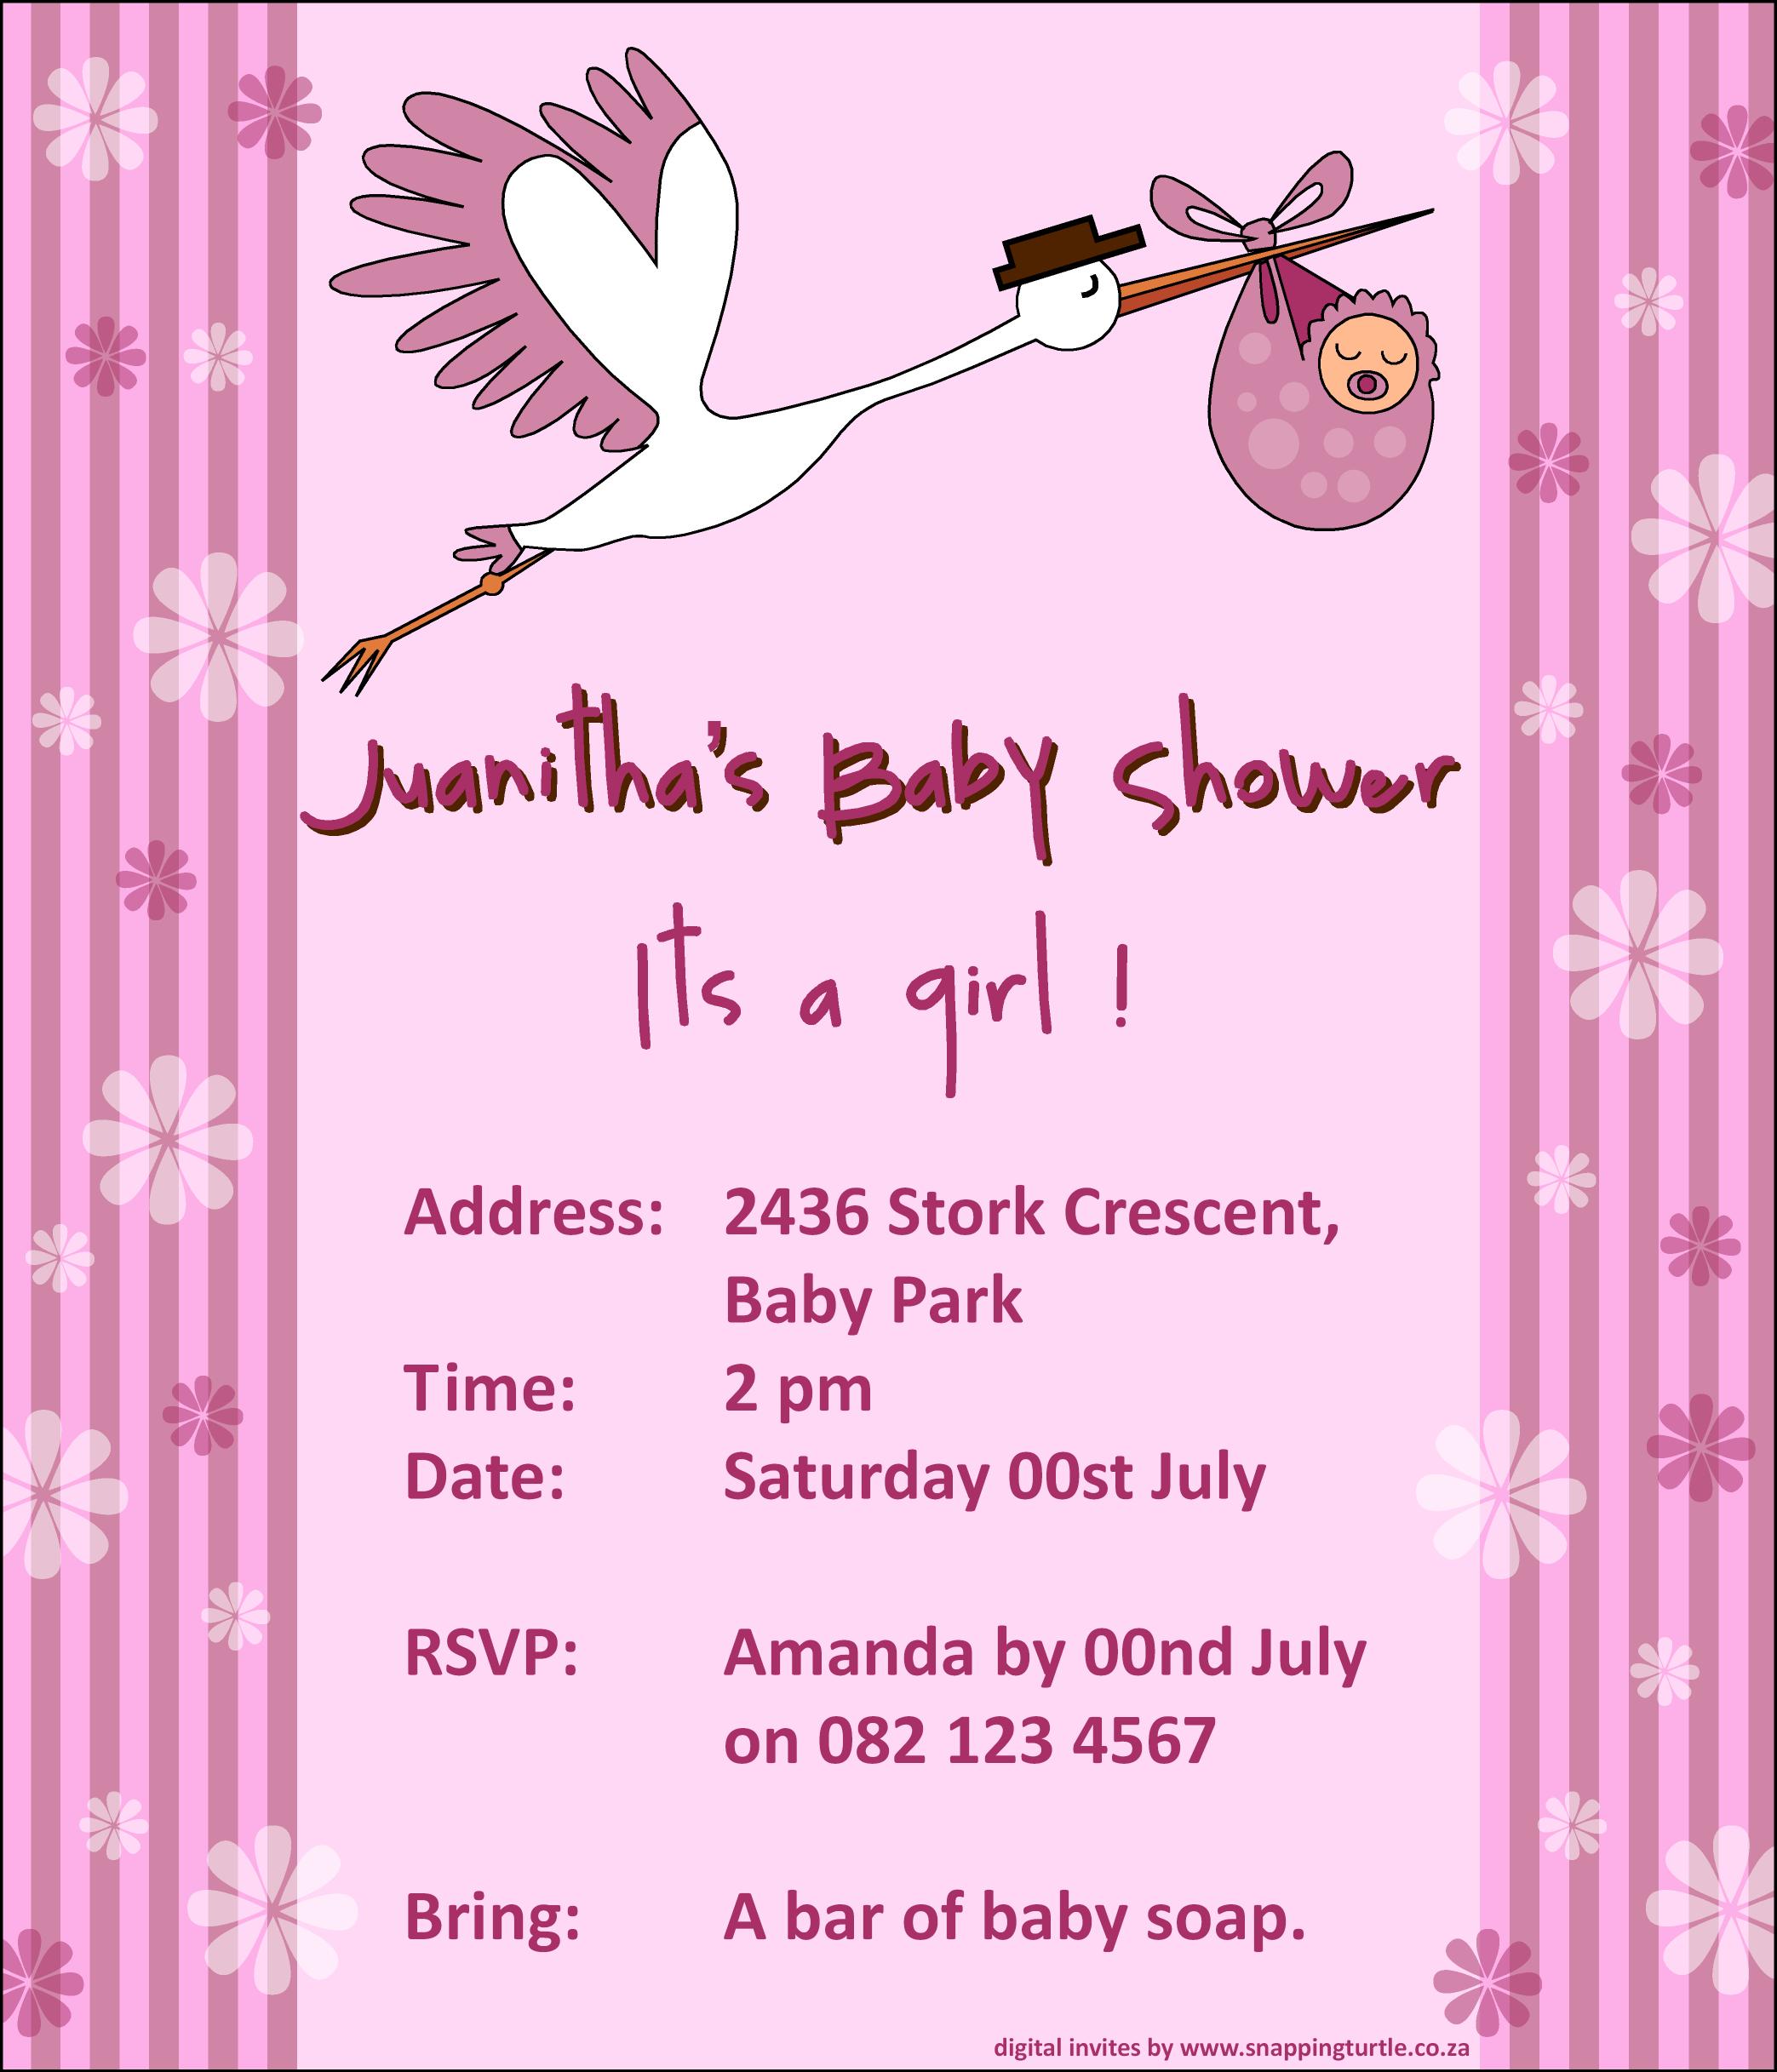 Full Size of Baby Shower:sturdy Baby Shower Invitation Template Image Concepts Baby Shower Invitation Template Electronic Baby Shower Invitations Electronic Baby Shower